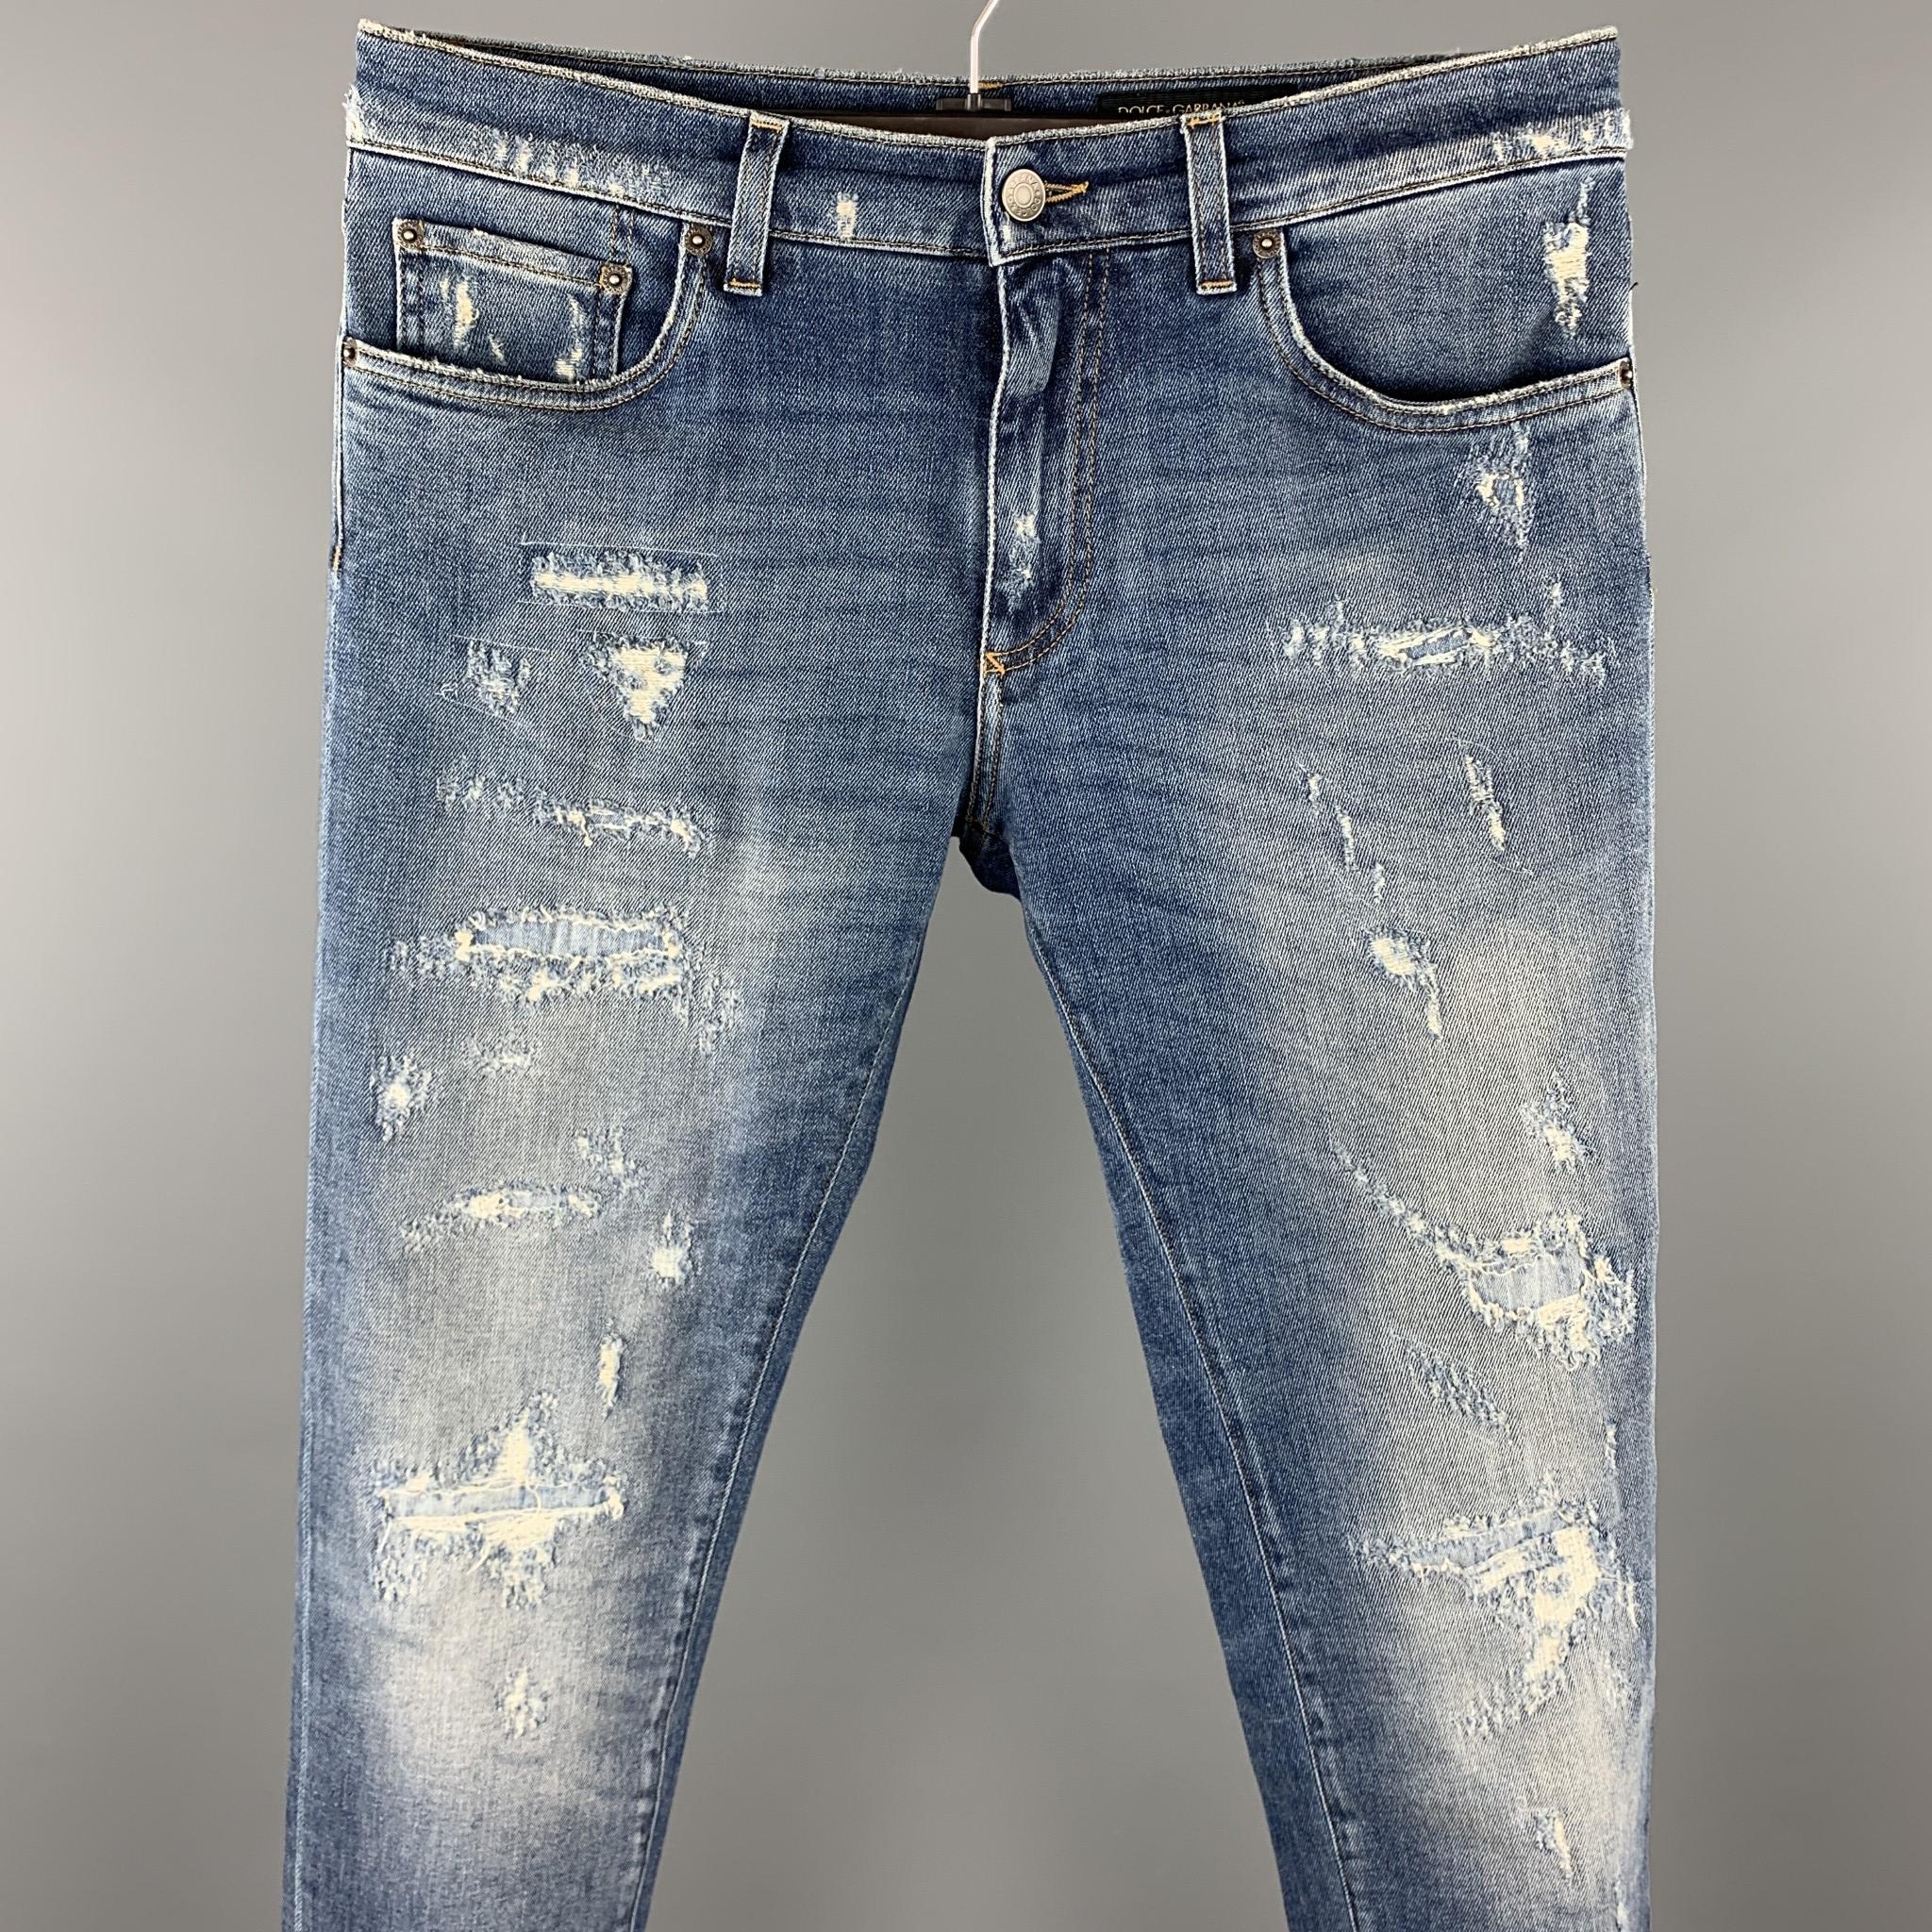 DOLCE & GABBANA jeans comes in a blue distressed denim featuring slim fit and a zip fly closure. Made in Italy.

Excellent Pre-Owned Condition.
Marked: IT 48

Measurements:

Waist: 34 in.
Rise: 9 in. 
Inseam: 28 in. 